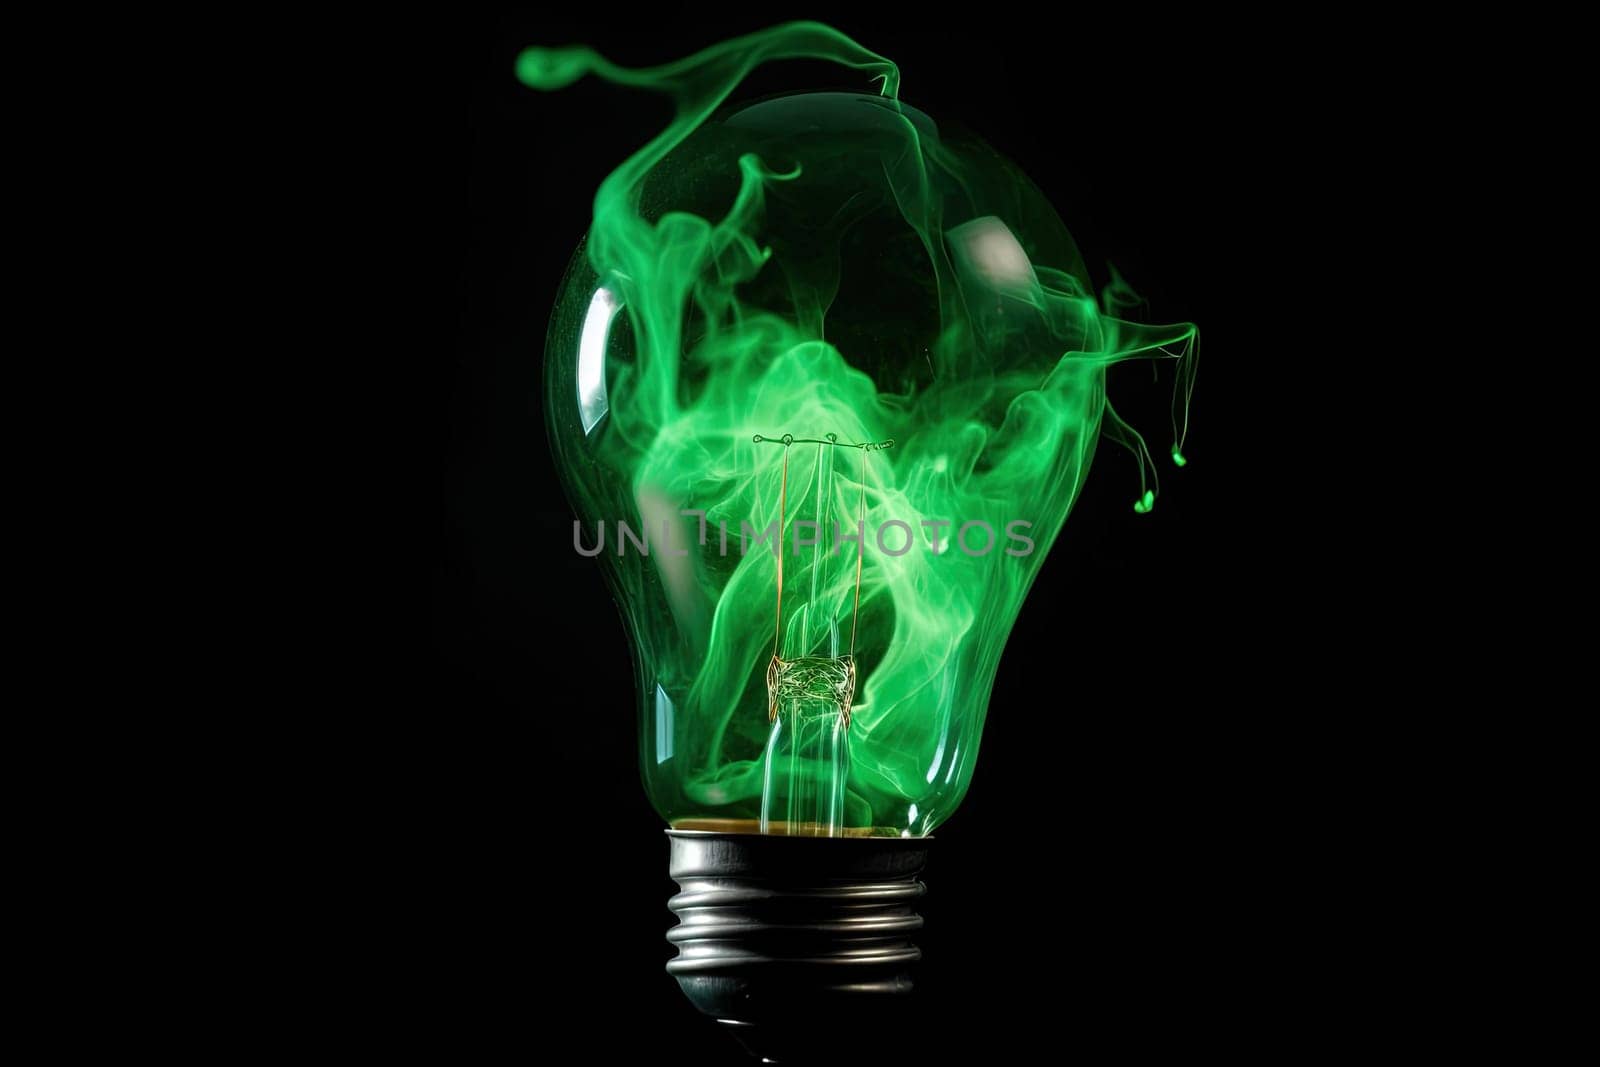 Electric Bulb With Green Smoke Inside On Black Background, Concept Of Ecological Problems by GekaSkr